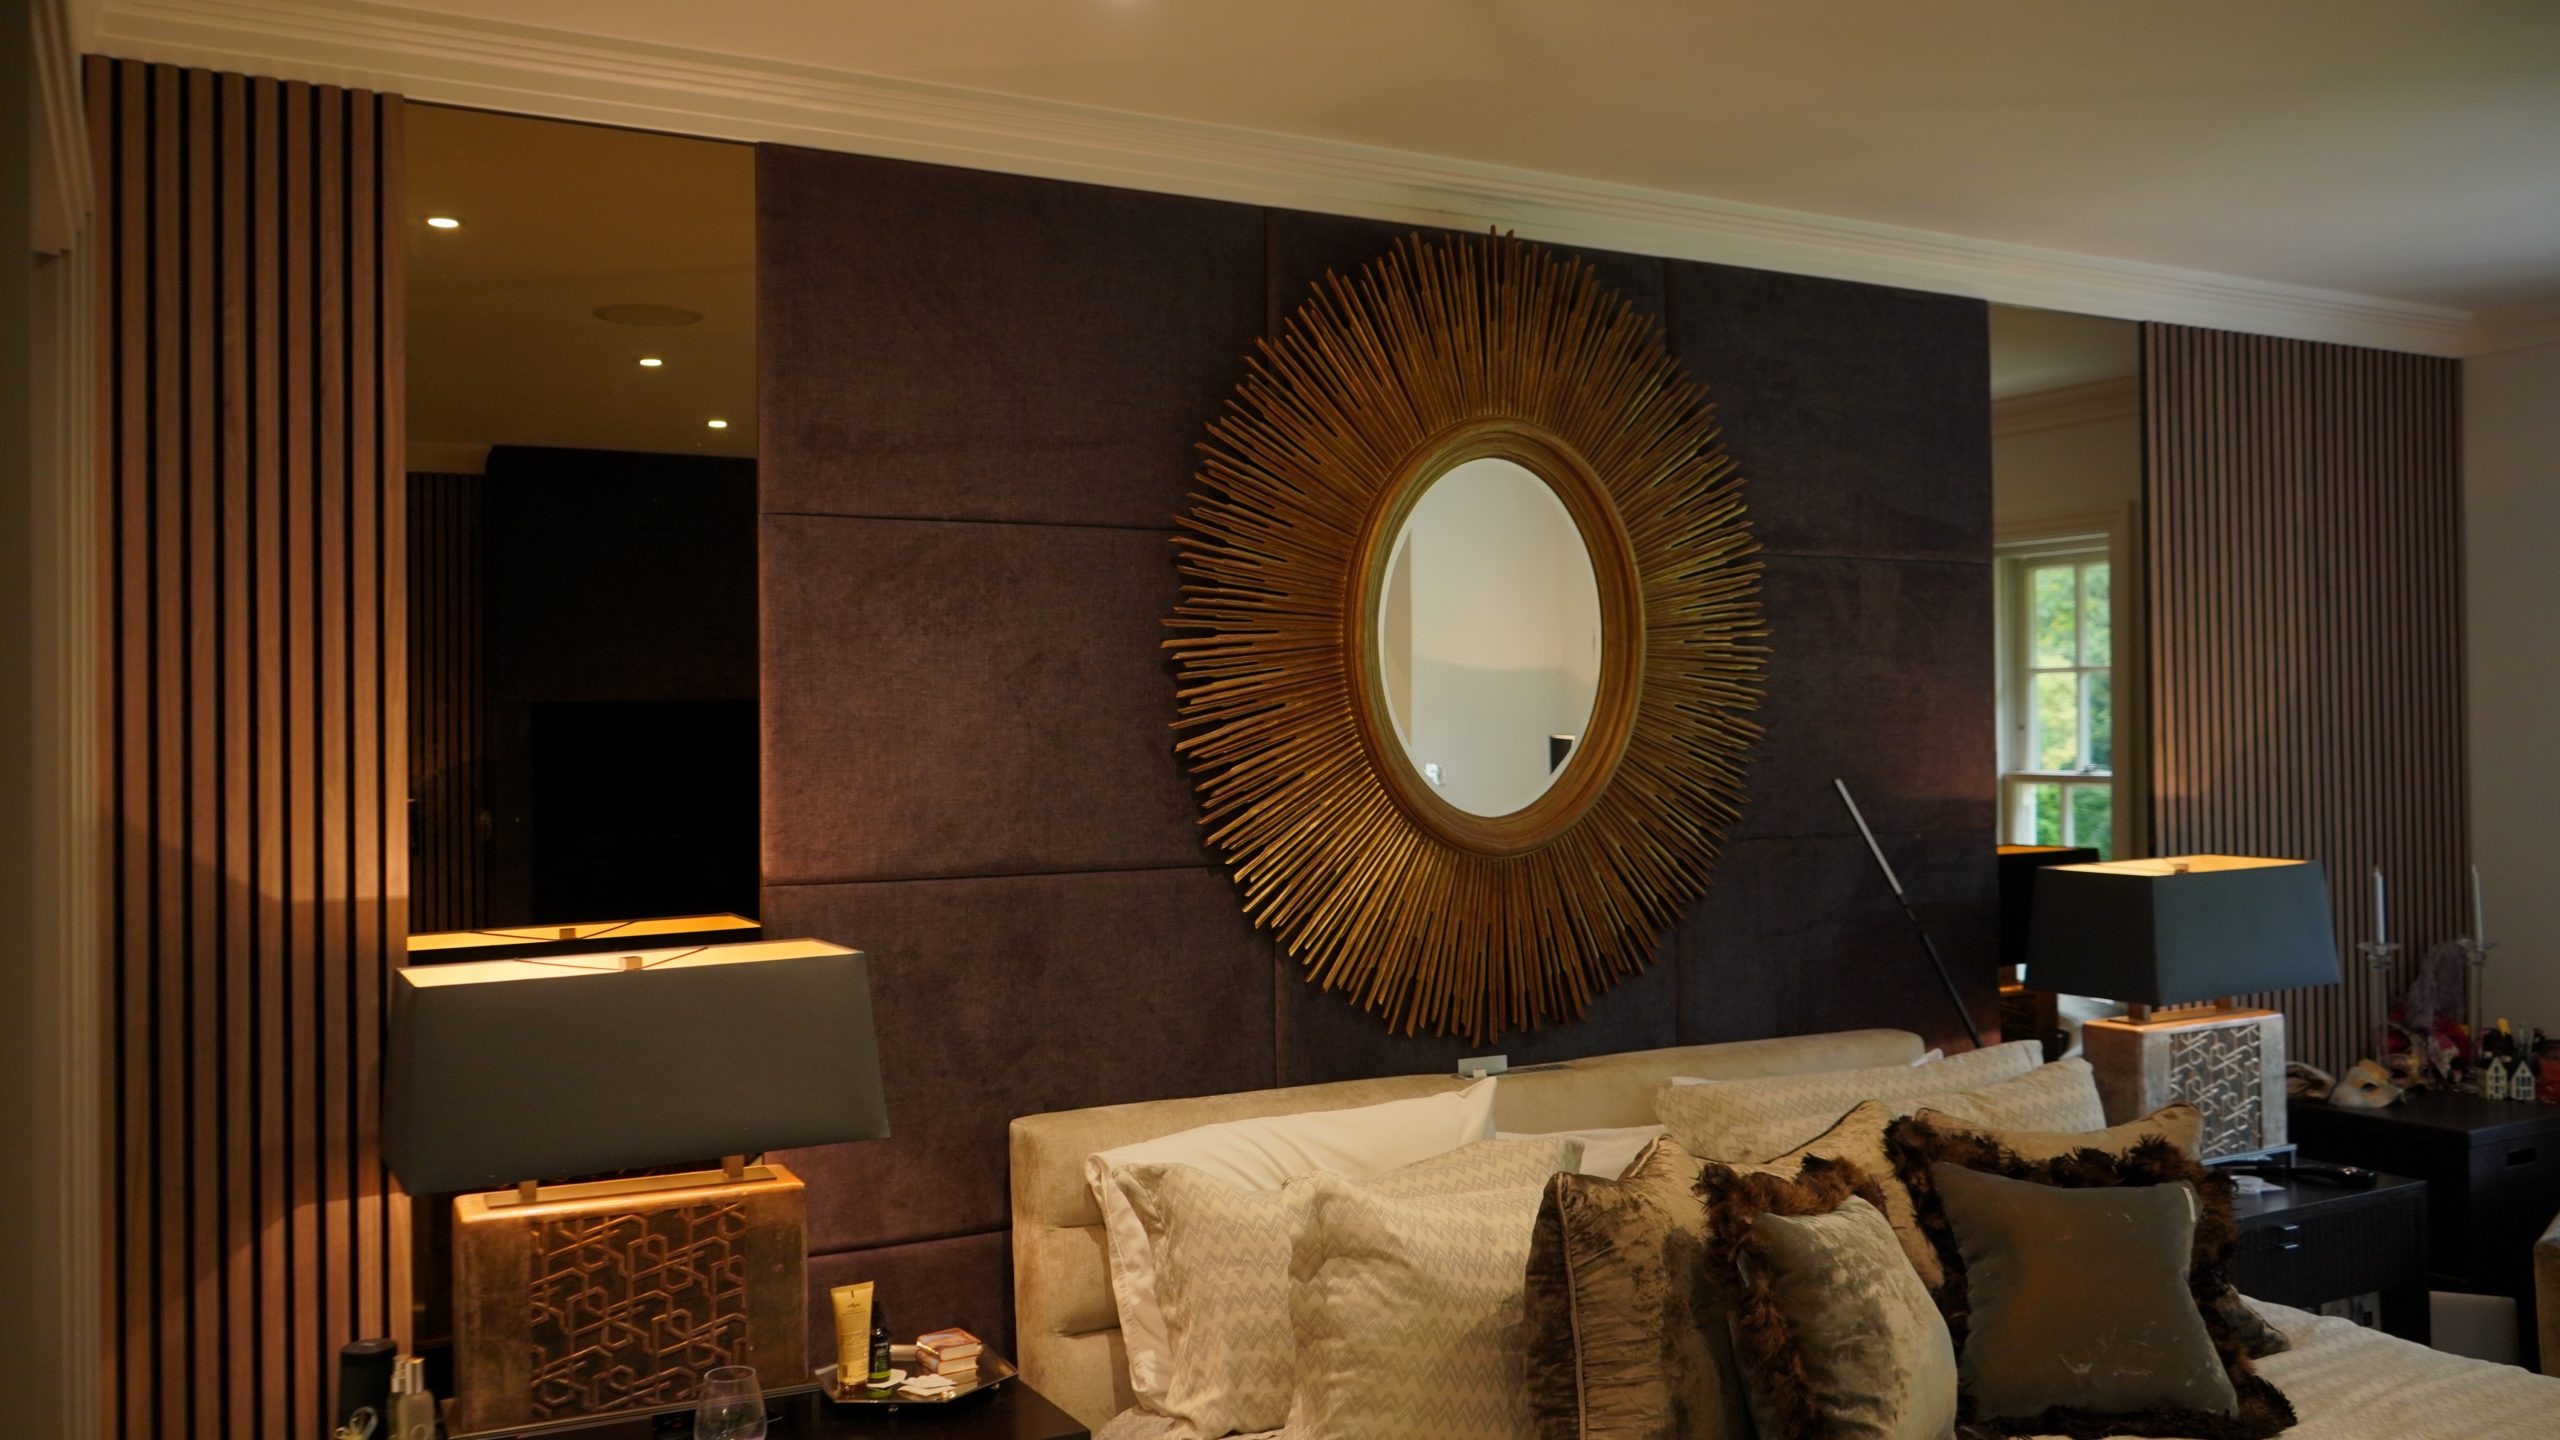 Decorative Mirror in the center of the bedroom